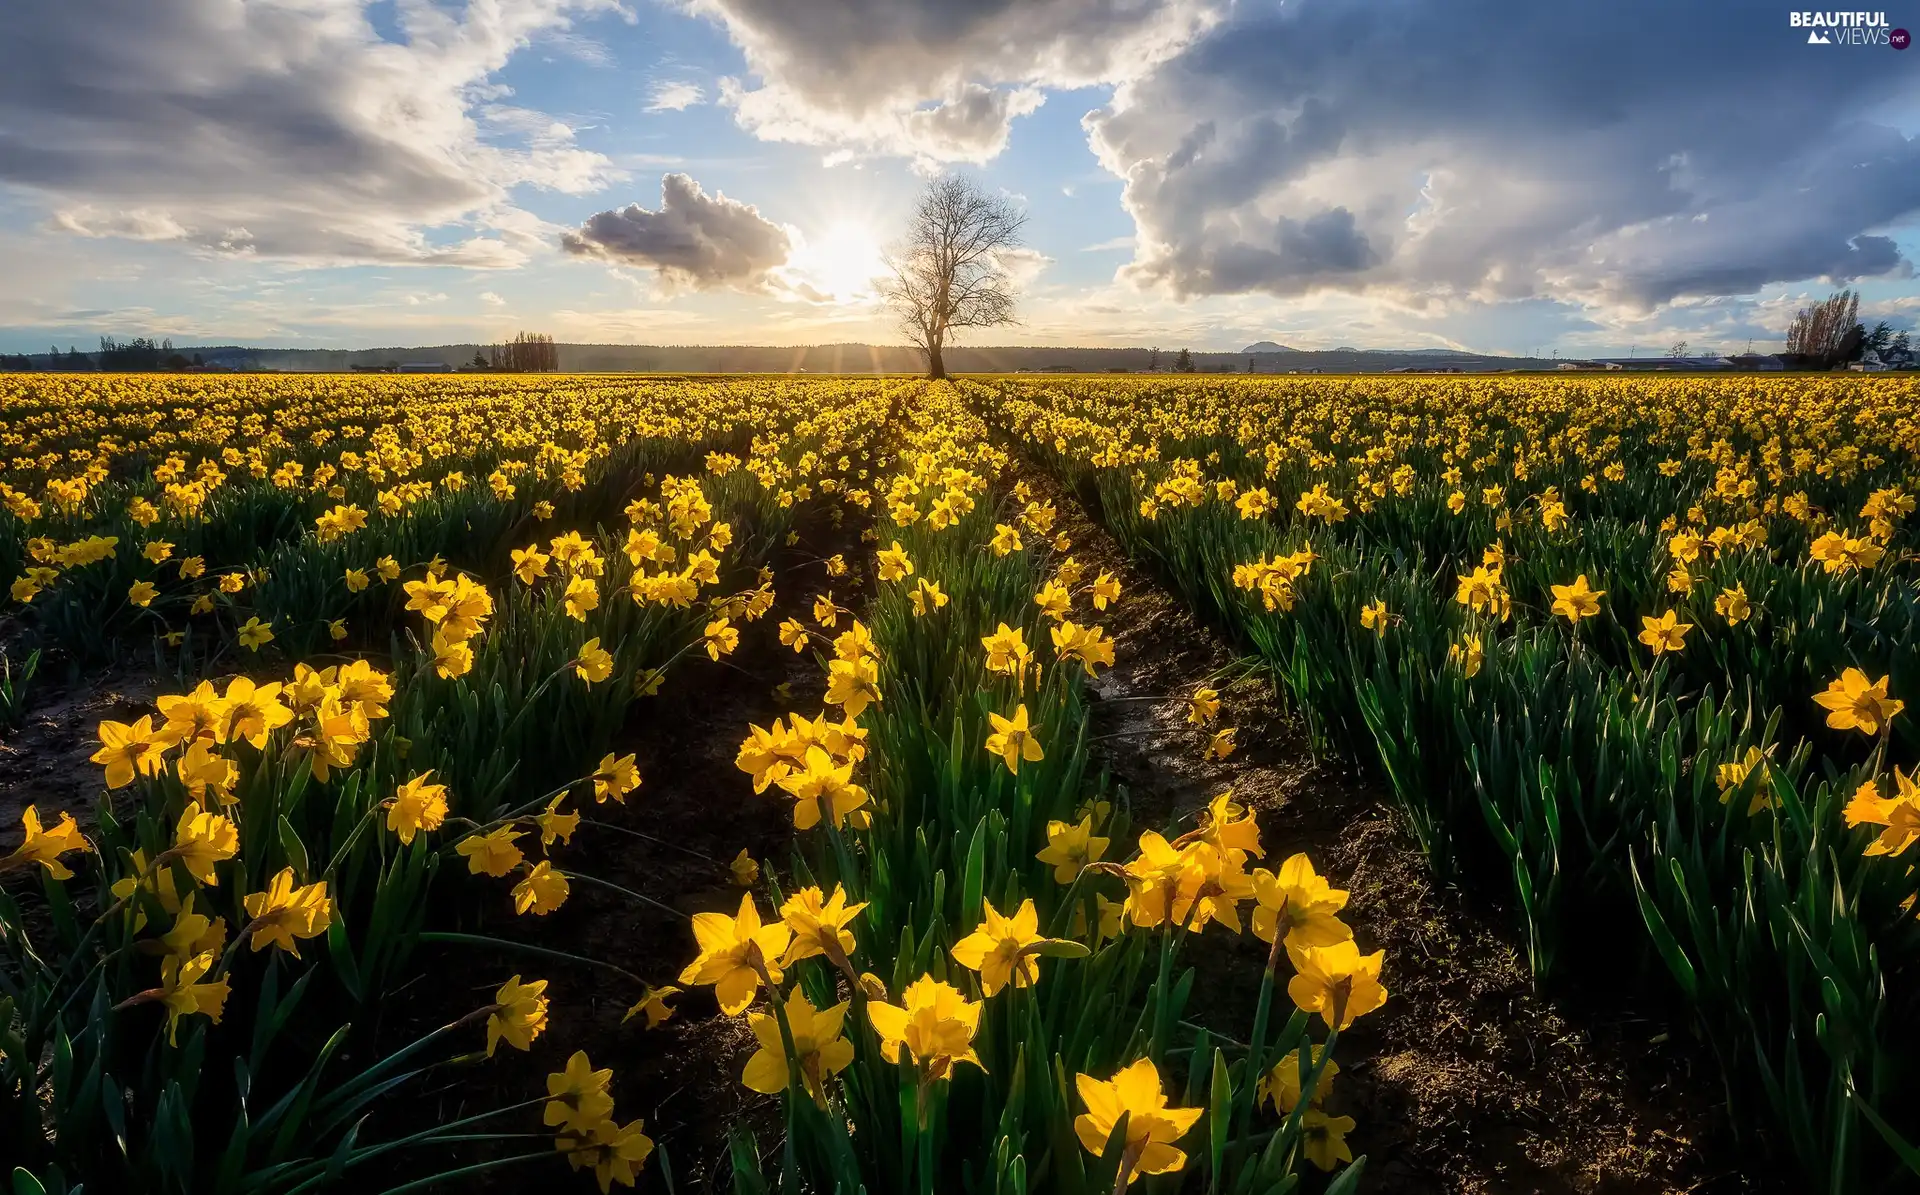 Sky, Field, rays of the Sun, Jonquil, Spring, clouds, trees